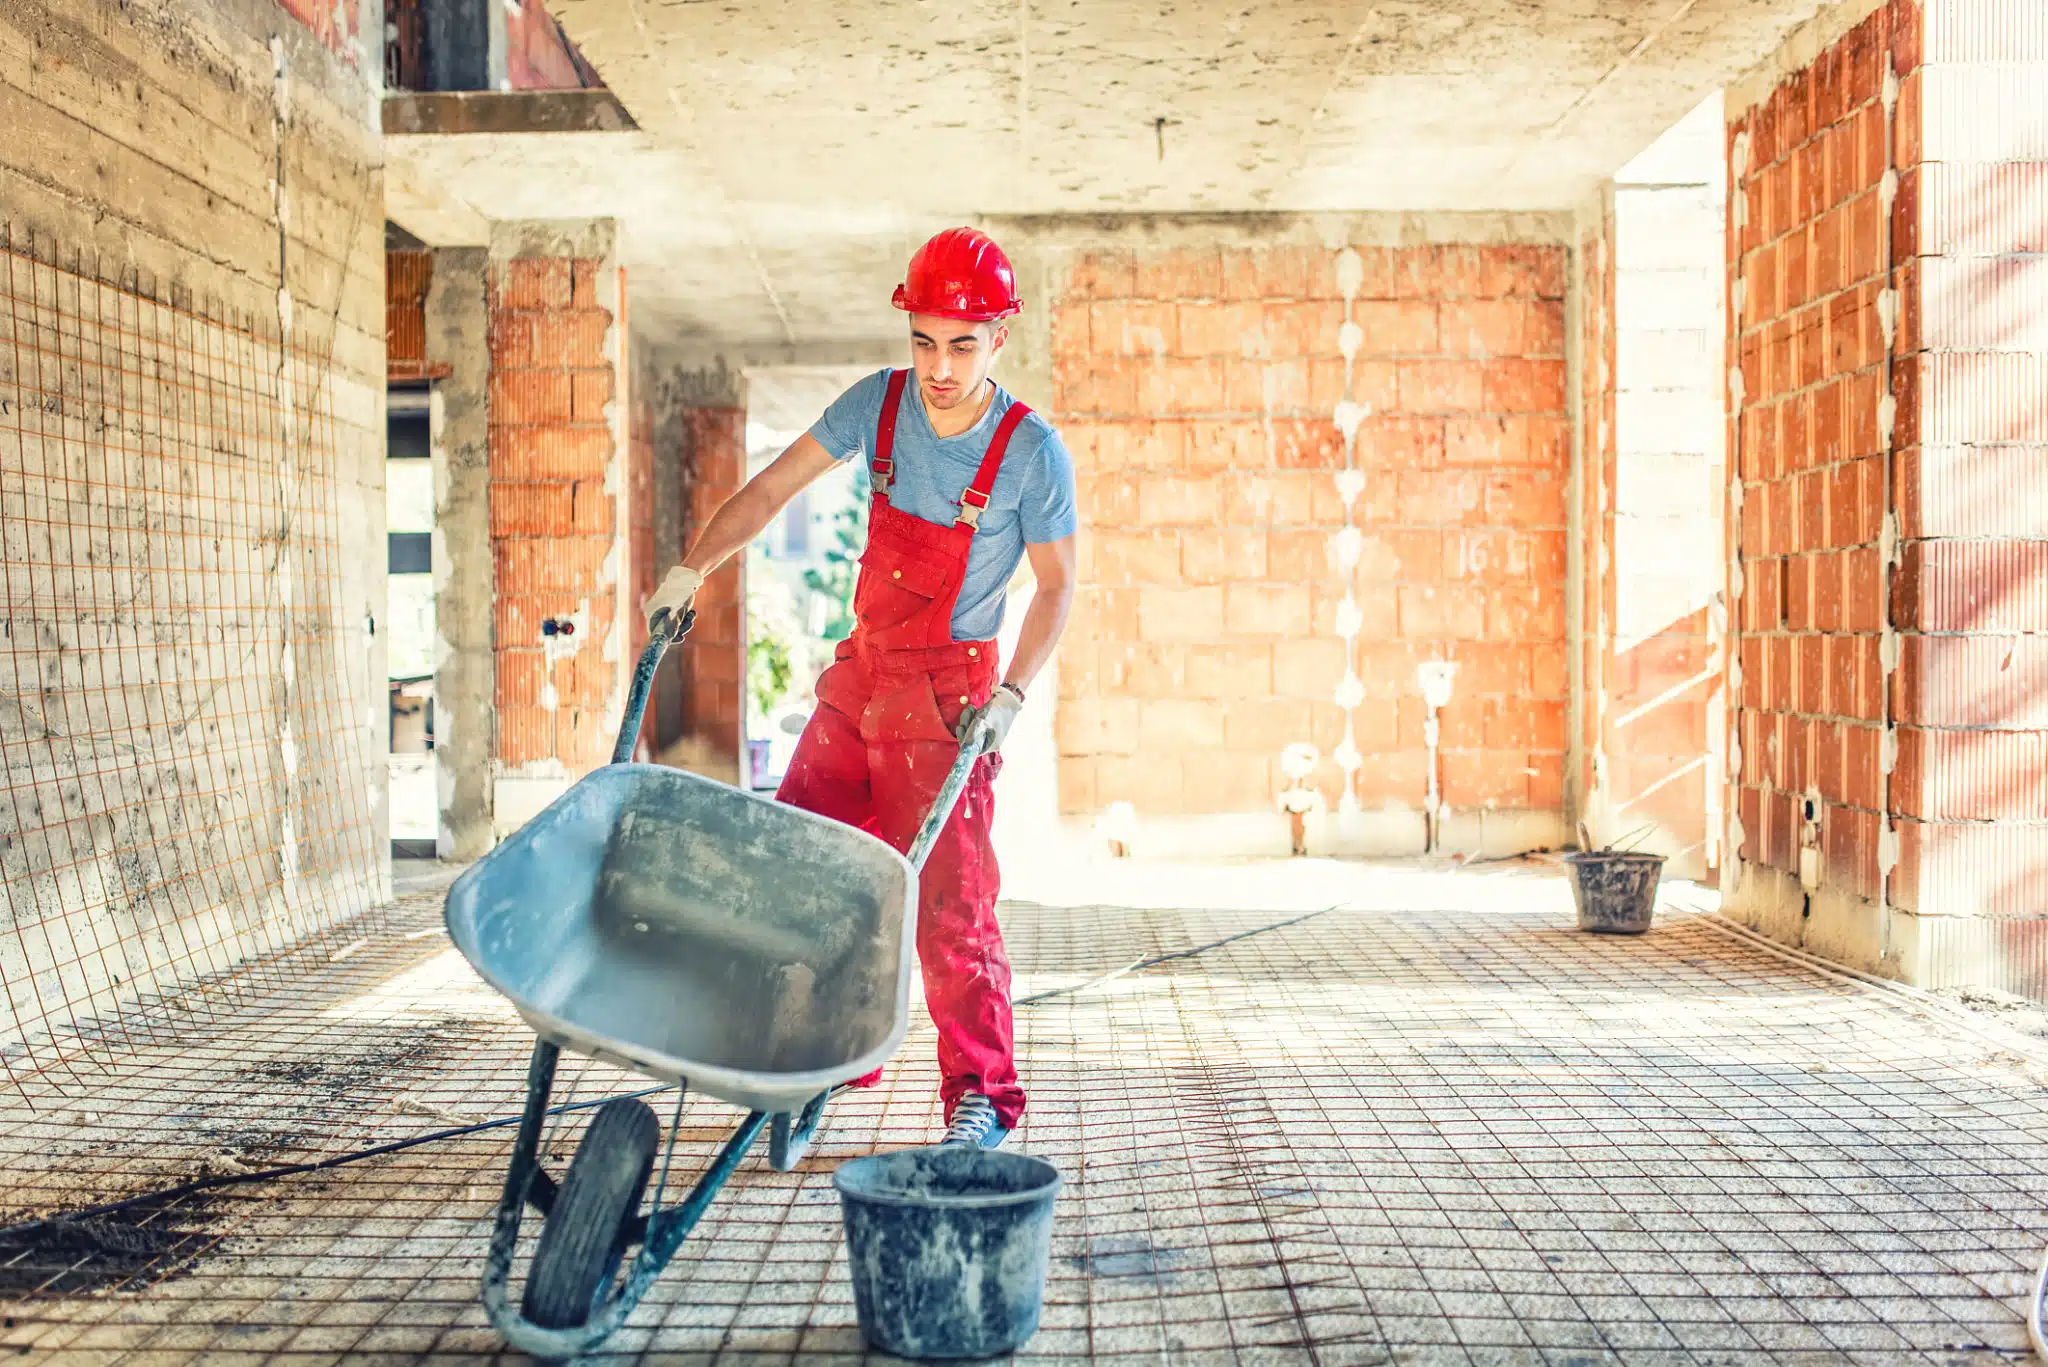 This image shows a construction worker wearing a red hard hat and red overalls, standing in a partially constructed building. The worker is pushing a wheelbarrow filled with construction materials, likely cement or mortar, across the concrete floor of the unfinished interior. The walls are made of exposed bricks, and there is natural light coming in through openings in the structure. The scene depicts an active construction site where the worker is engaged in the process of building or renovating the structure.